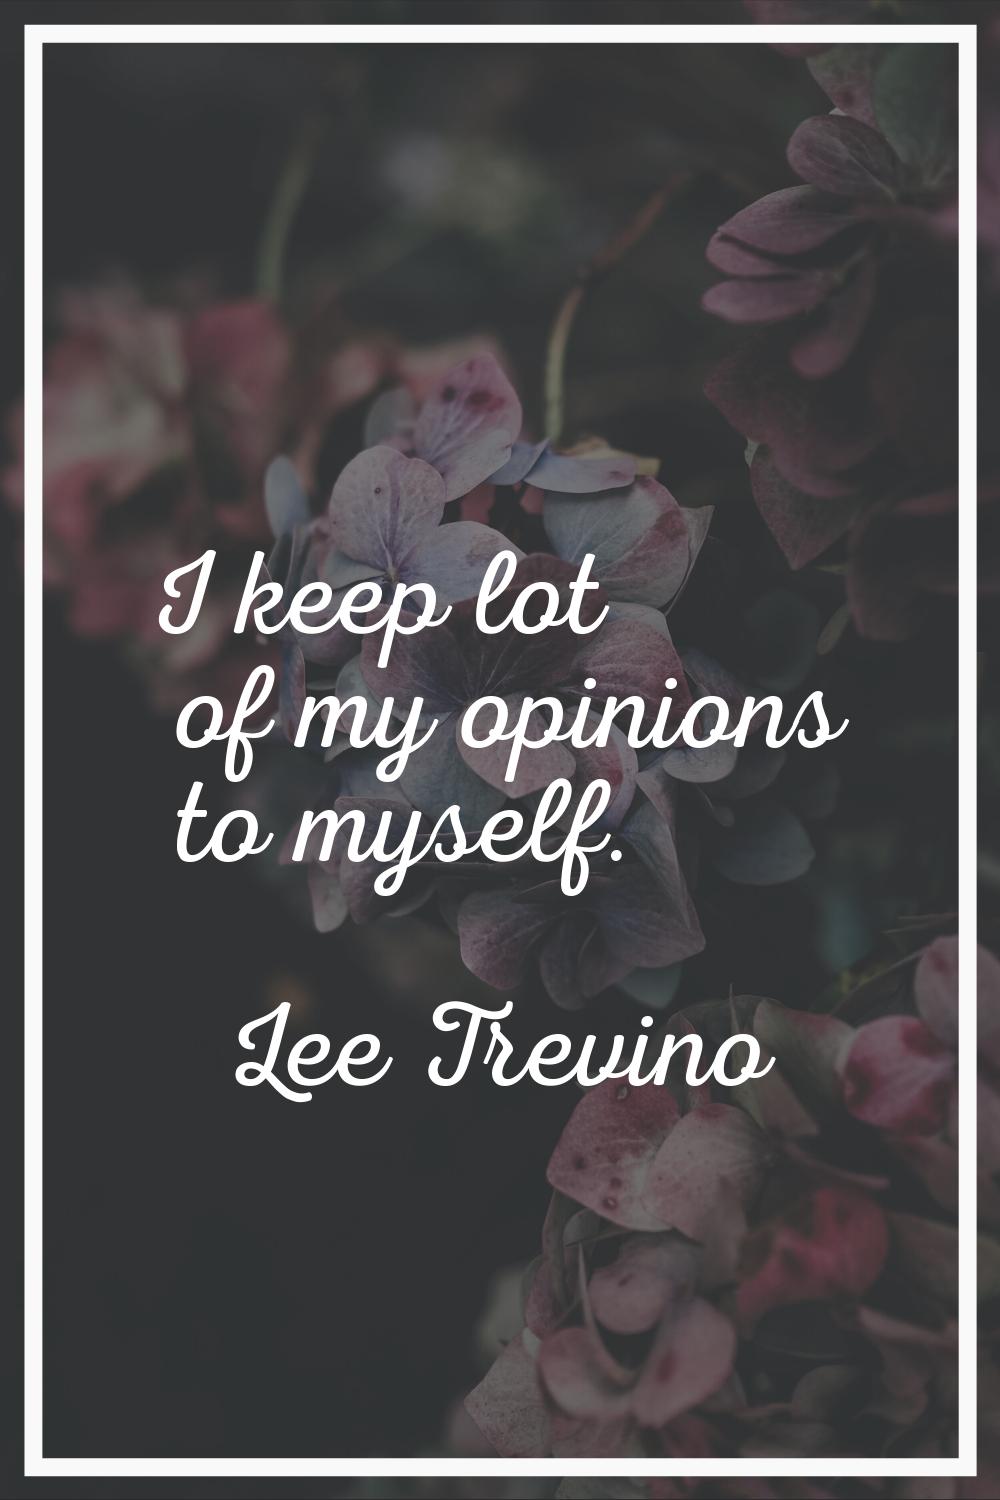 I keep lot of my opinions to myself.